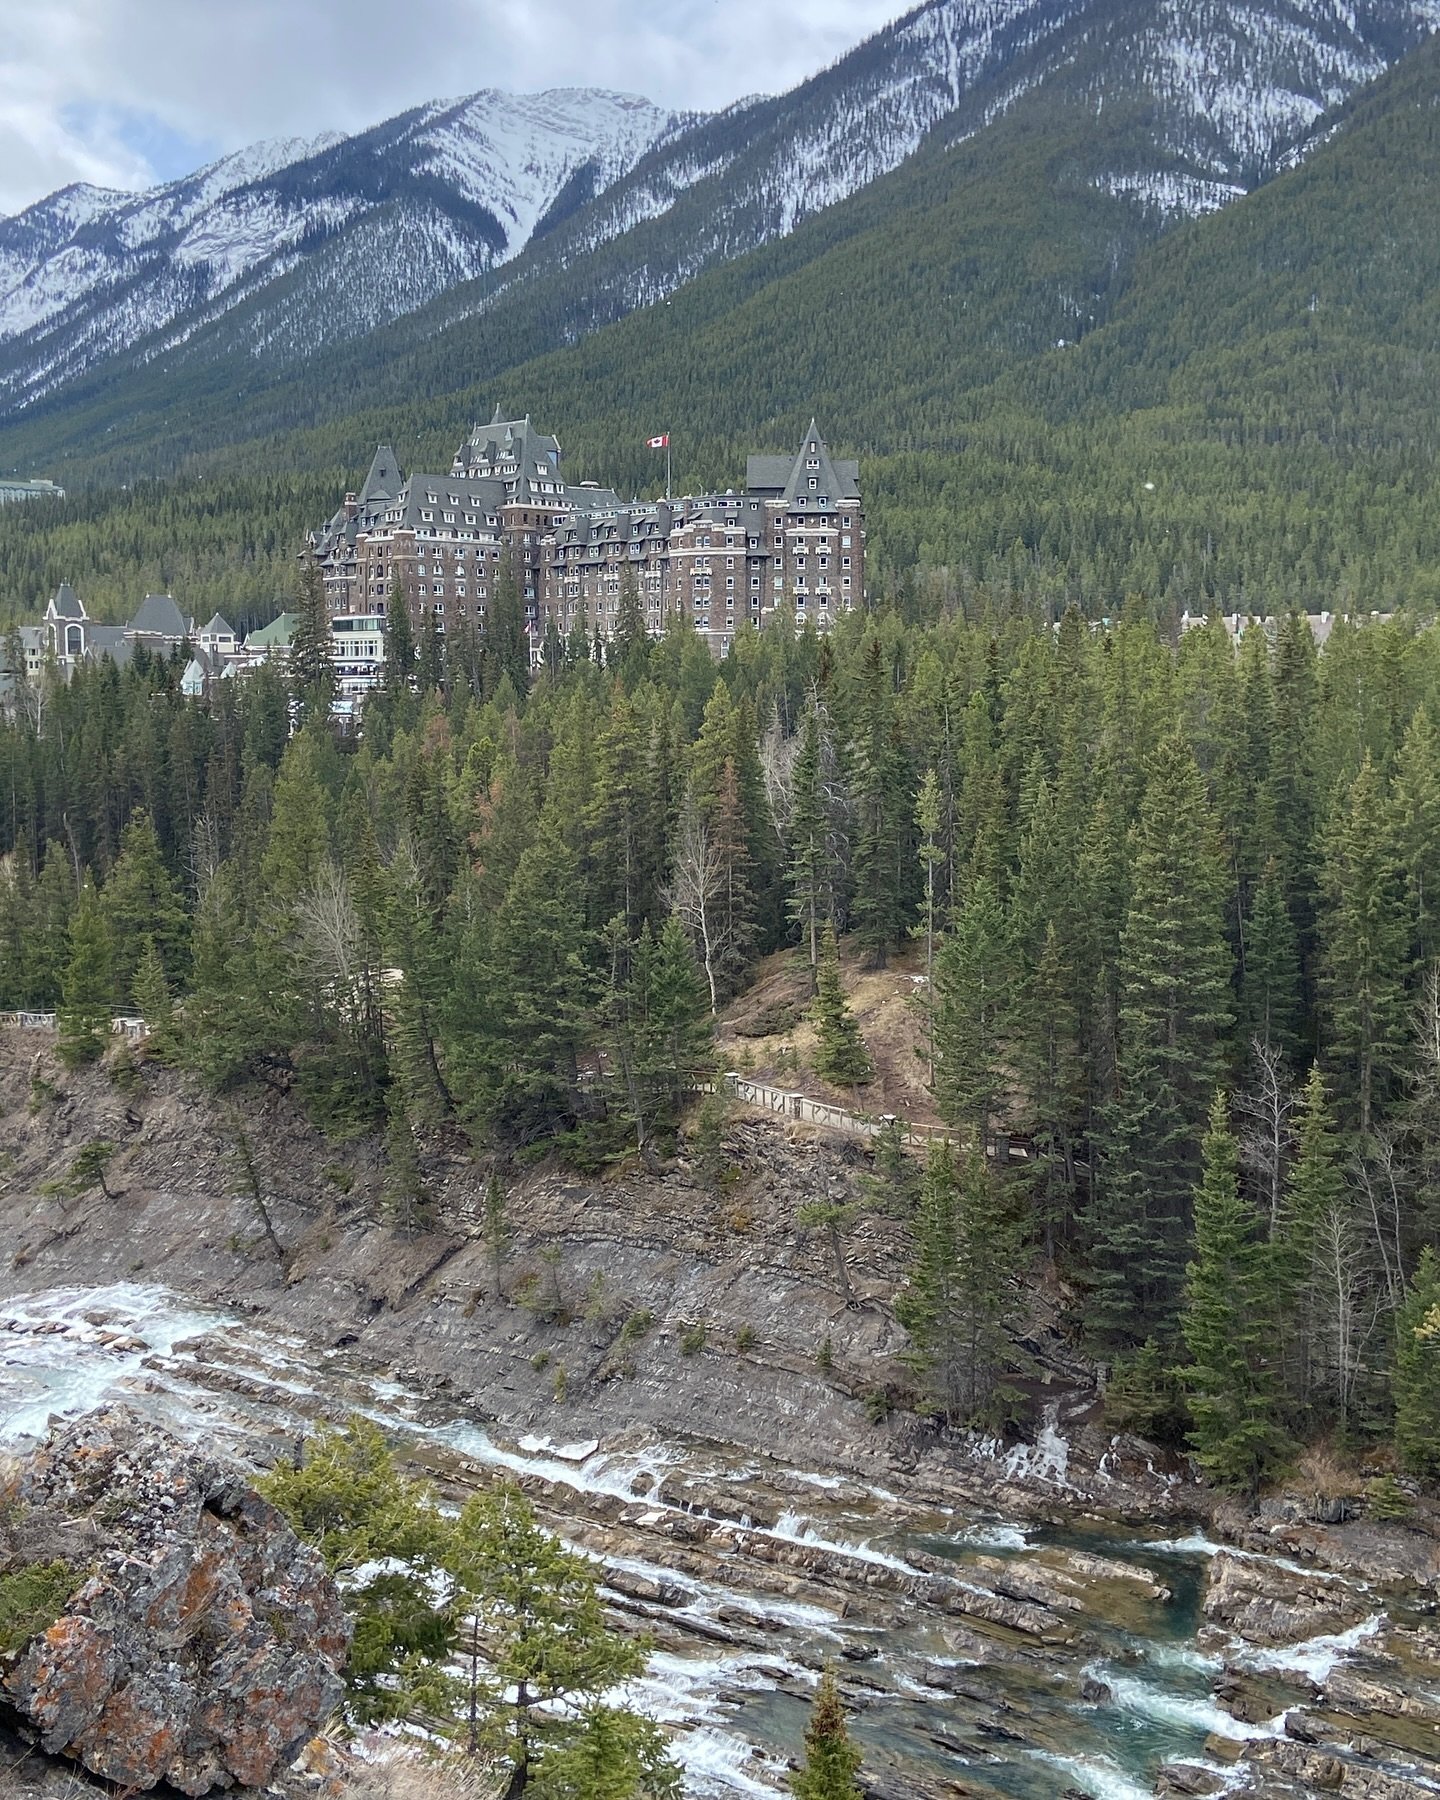 The iconic view of the Fairmont Banff Springs Hotel from Surprise Corner with Sulphur Mountain in the background and the Bow Falls in the foreground